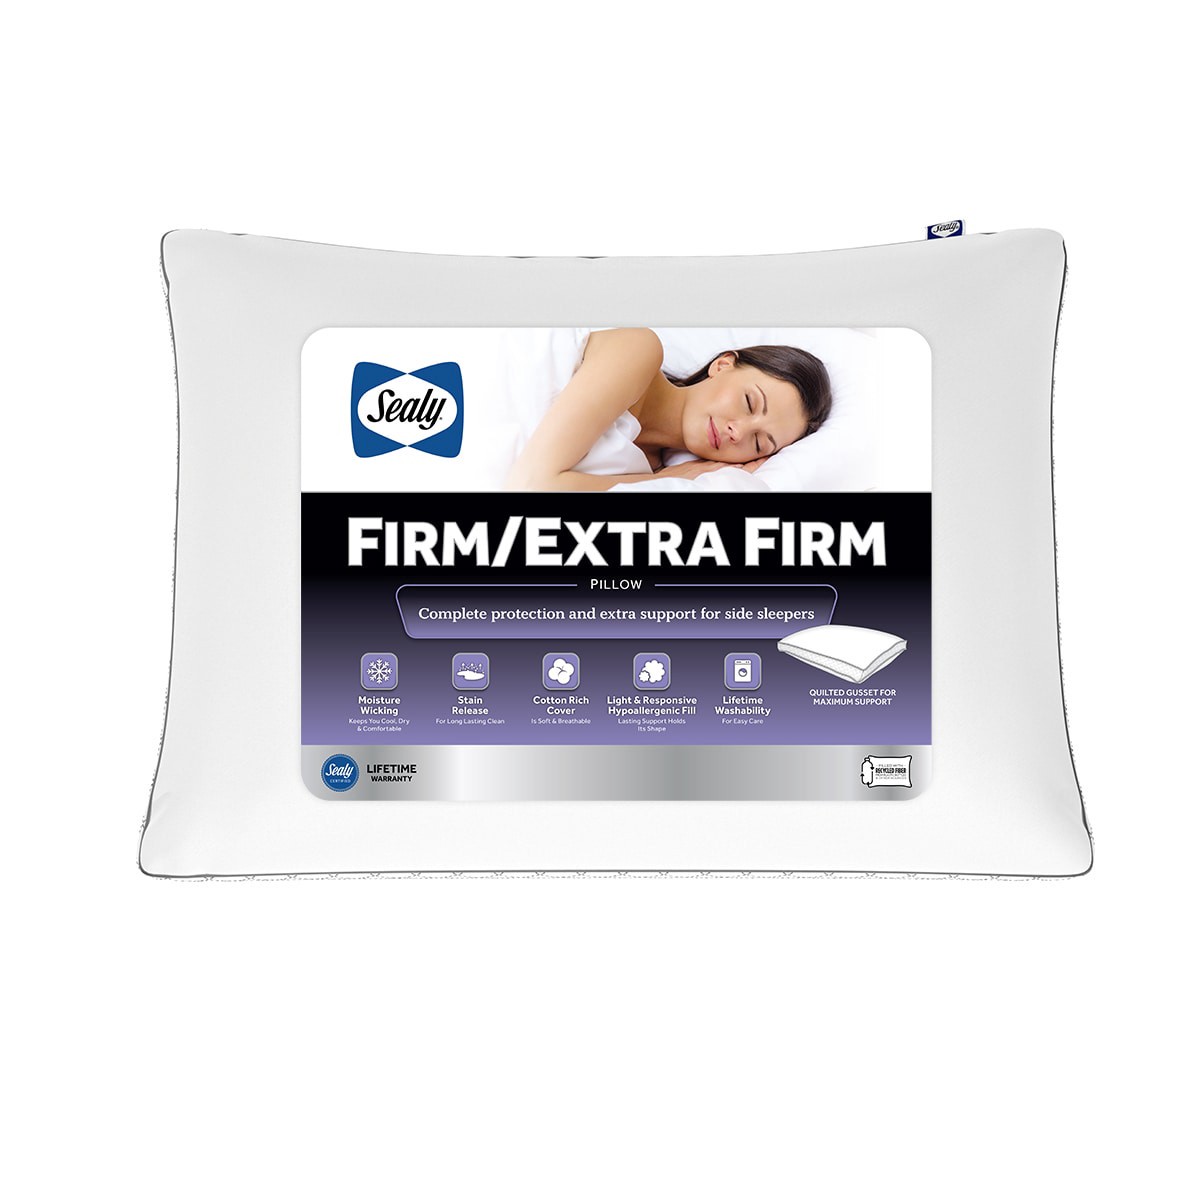 slide 1 of 29, Sealy Firm/Extra Firm Support Pillow, Jumbo, 1 ct